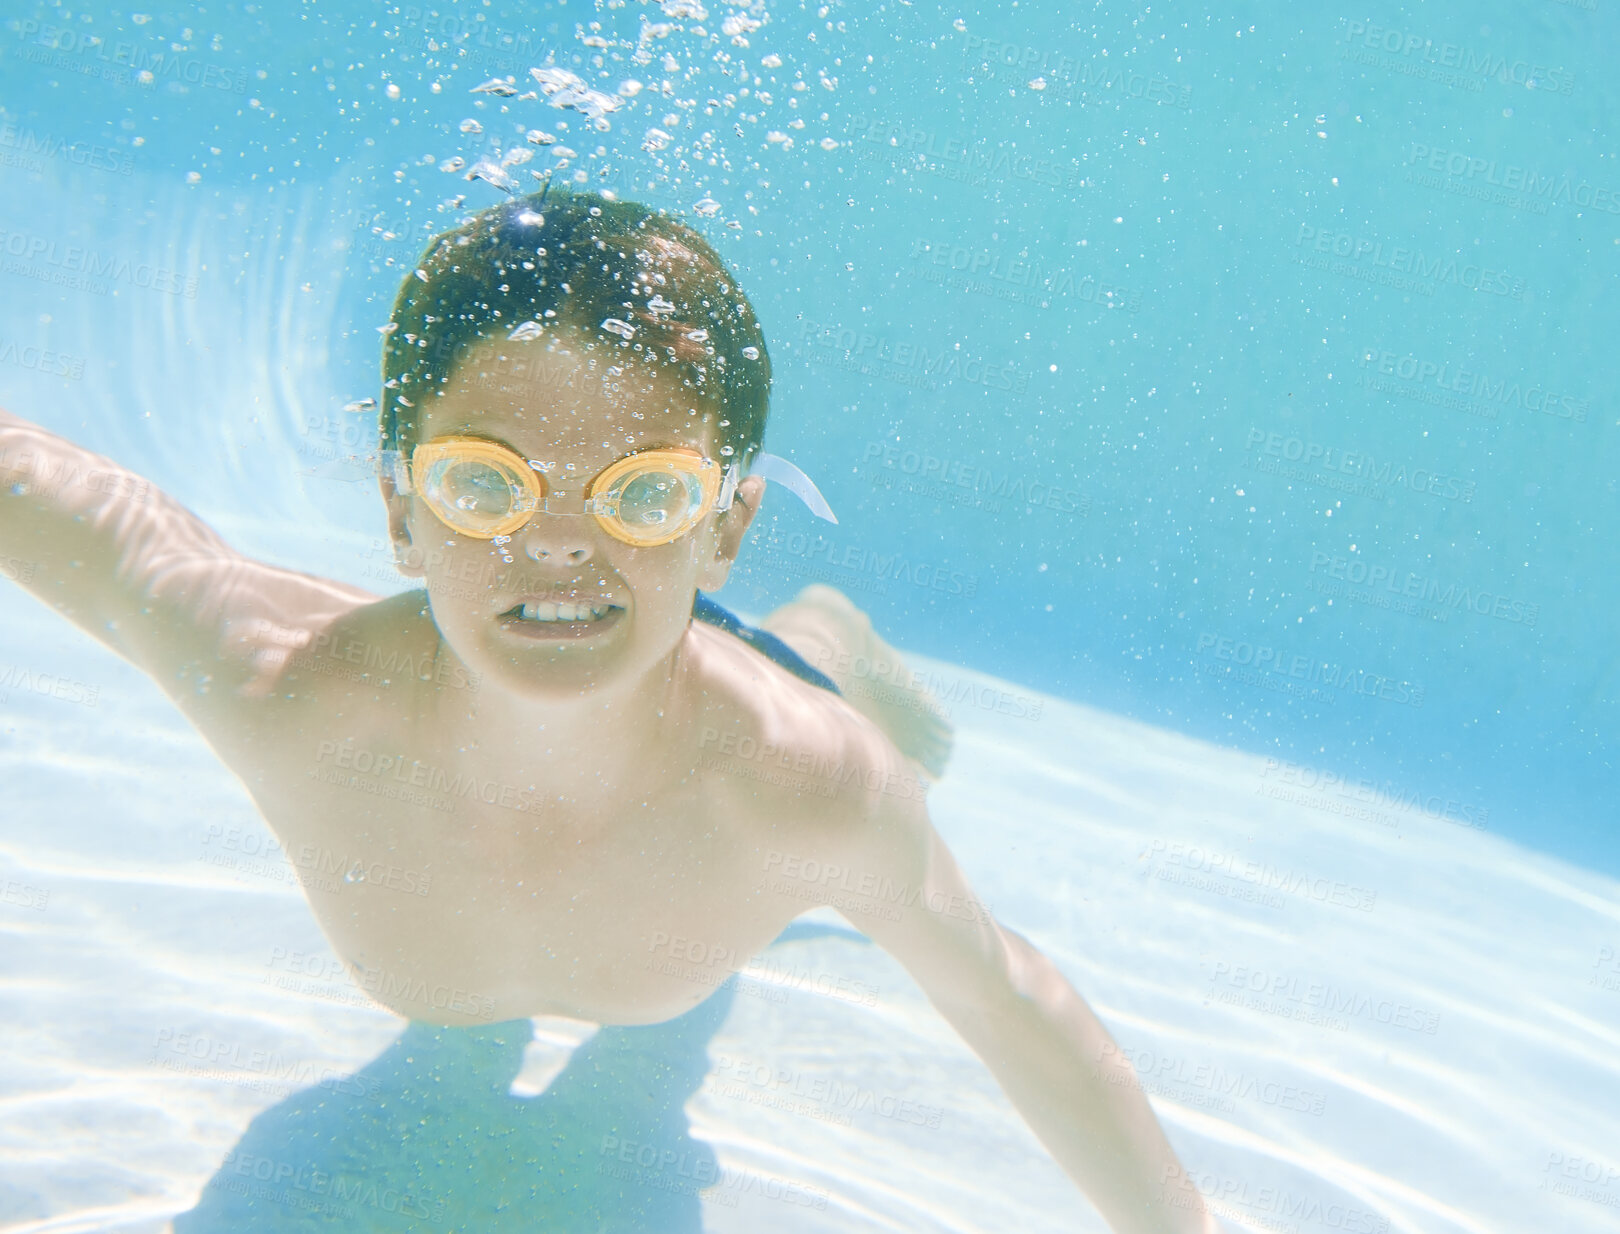 Buy stock photo Shot of a little boy wearing swimming goggles while swimming underwater